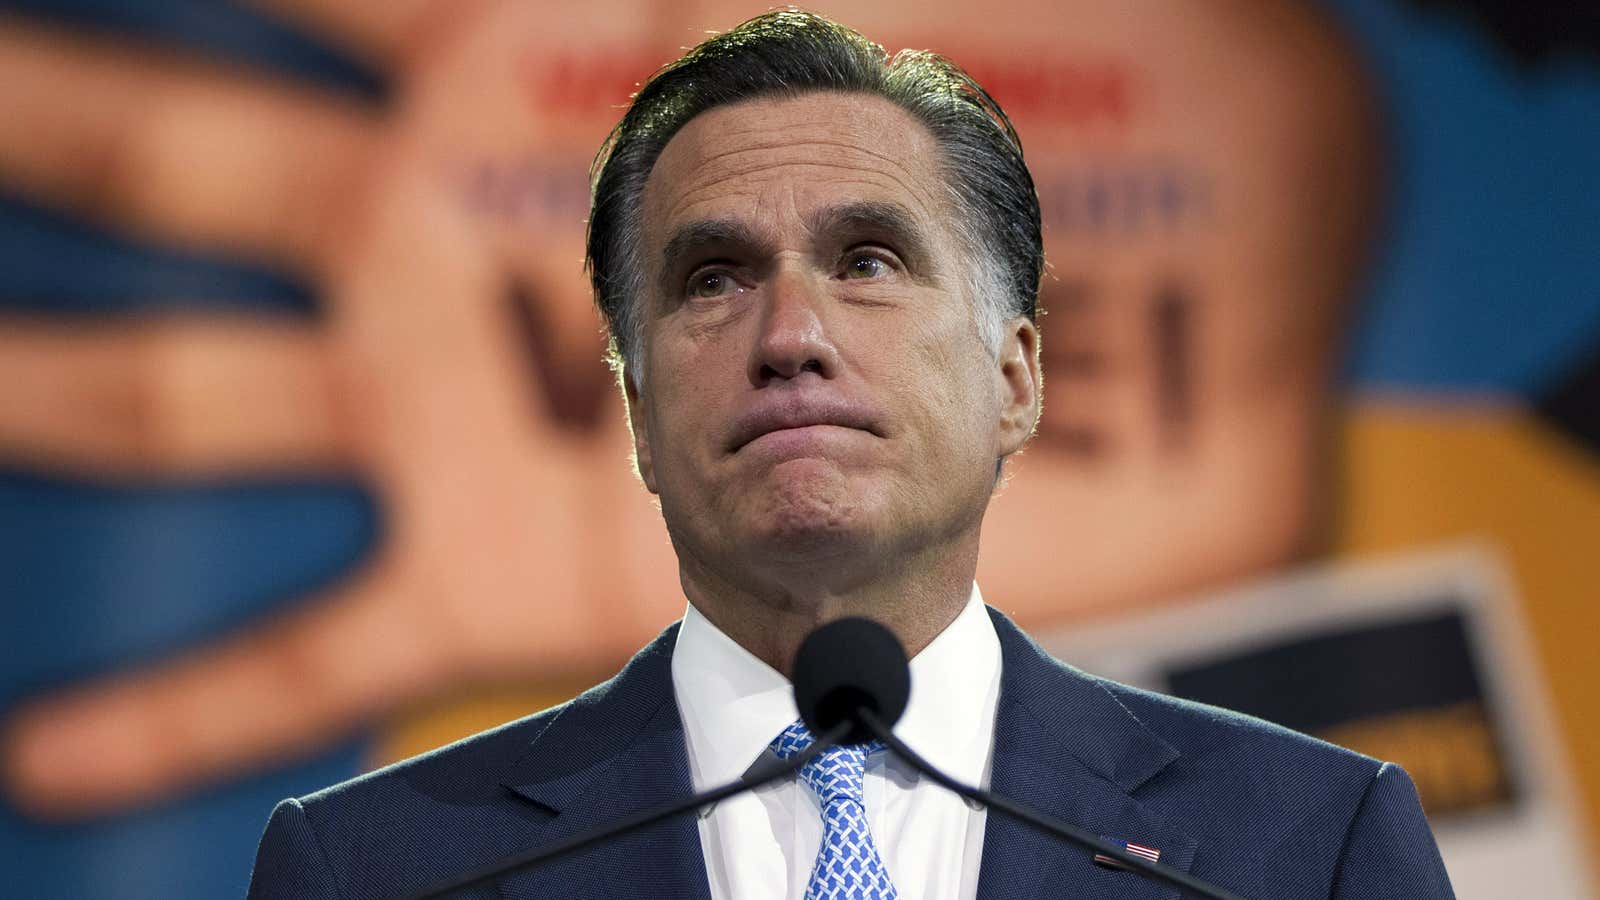 The Republicans risk losing the Millennials for good if Romney loses this election.